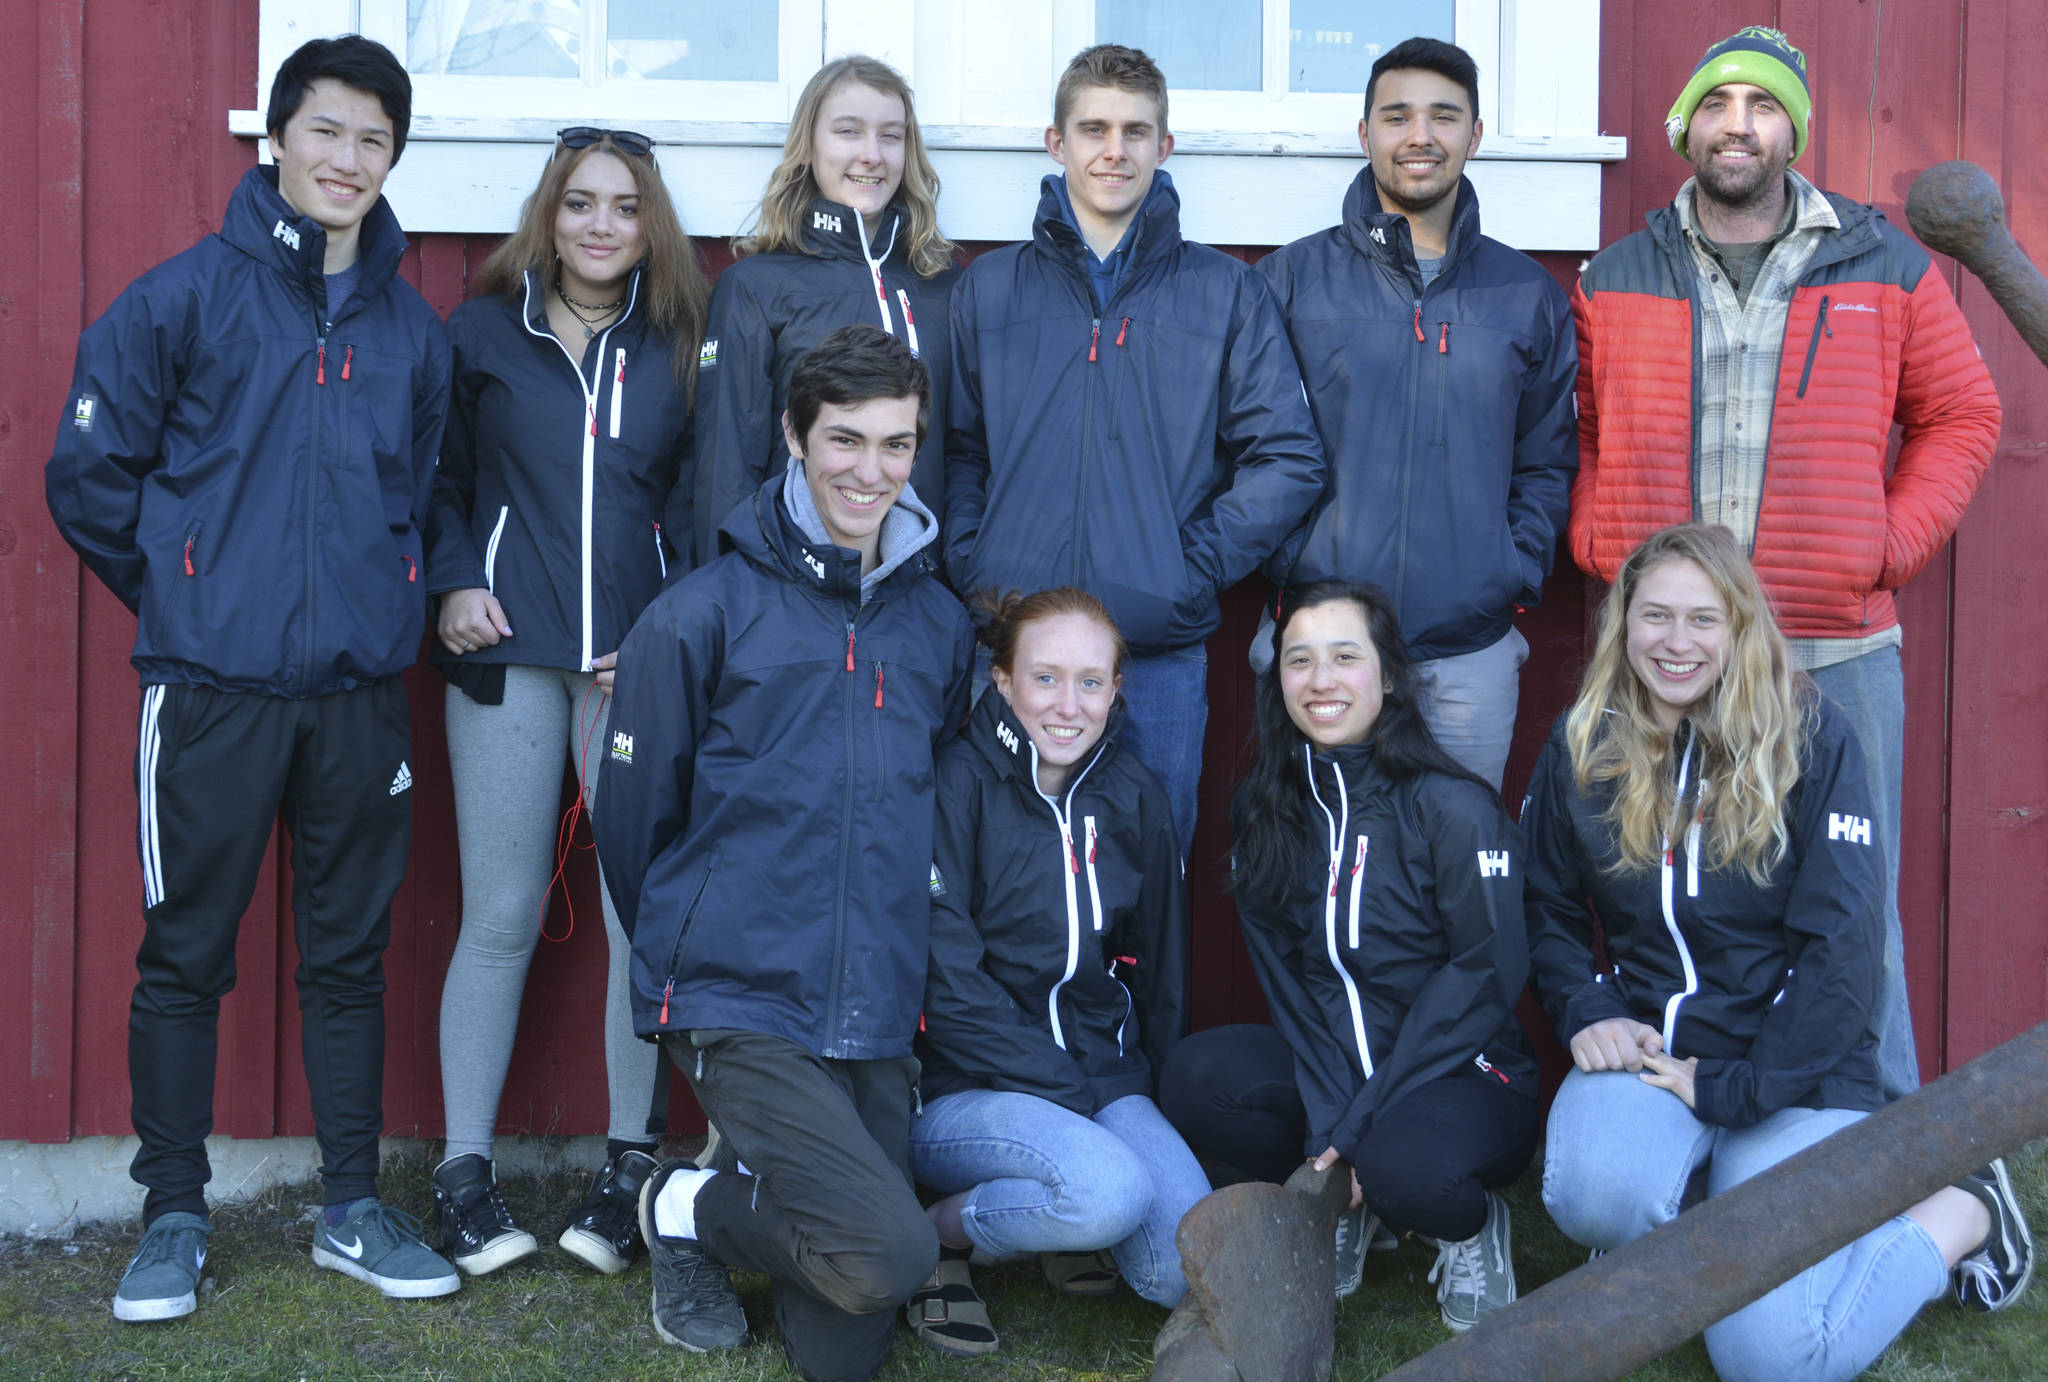 &lt;style type="text/css"&gt;&lt;/style&gt;                                Contributed photo                                 Back row, left to right: Ronan Kau, Jaya Griessemer, Cailin Tucker, Ronan Rankin, Dominick Wareham and coach Nate Averna. Front row: Landon Carter, Miette Woolworth, Amelia Kau and Emma Freedman. Sailor not pictured: Levi Moss. Coaches not pictured: Chris Wolfe, Justin Wolfe, Steve Vurno and Burke Thomas.